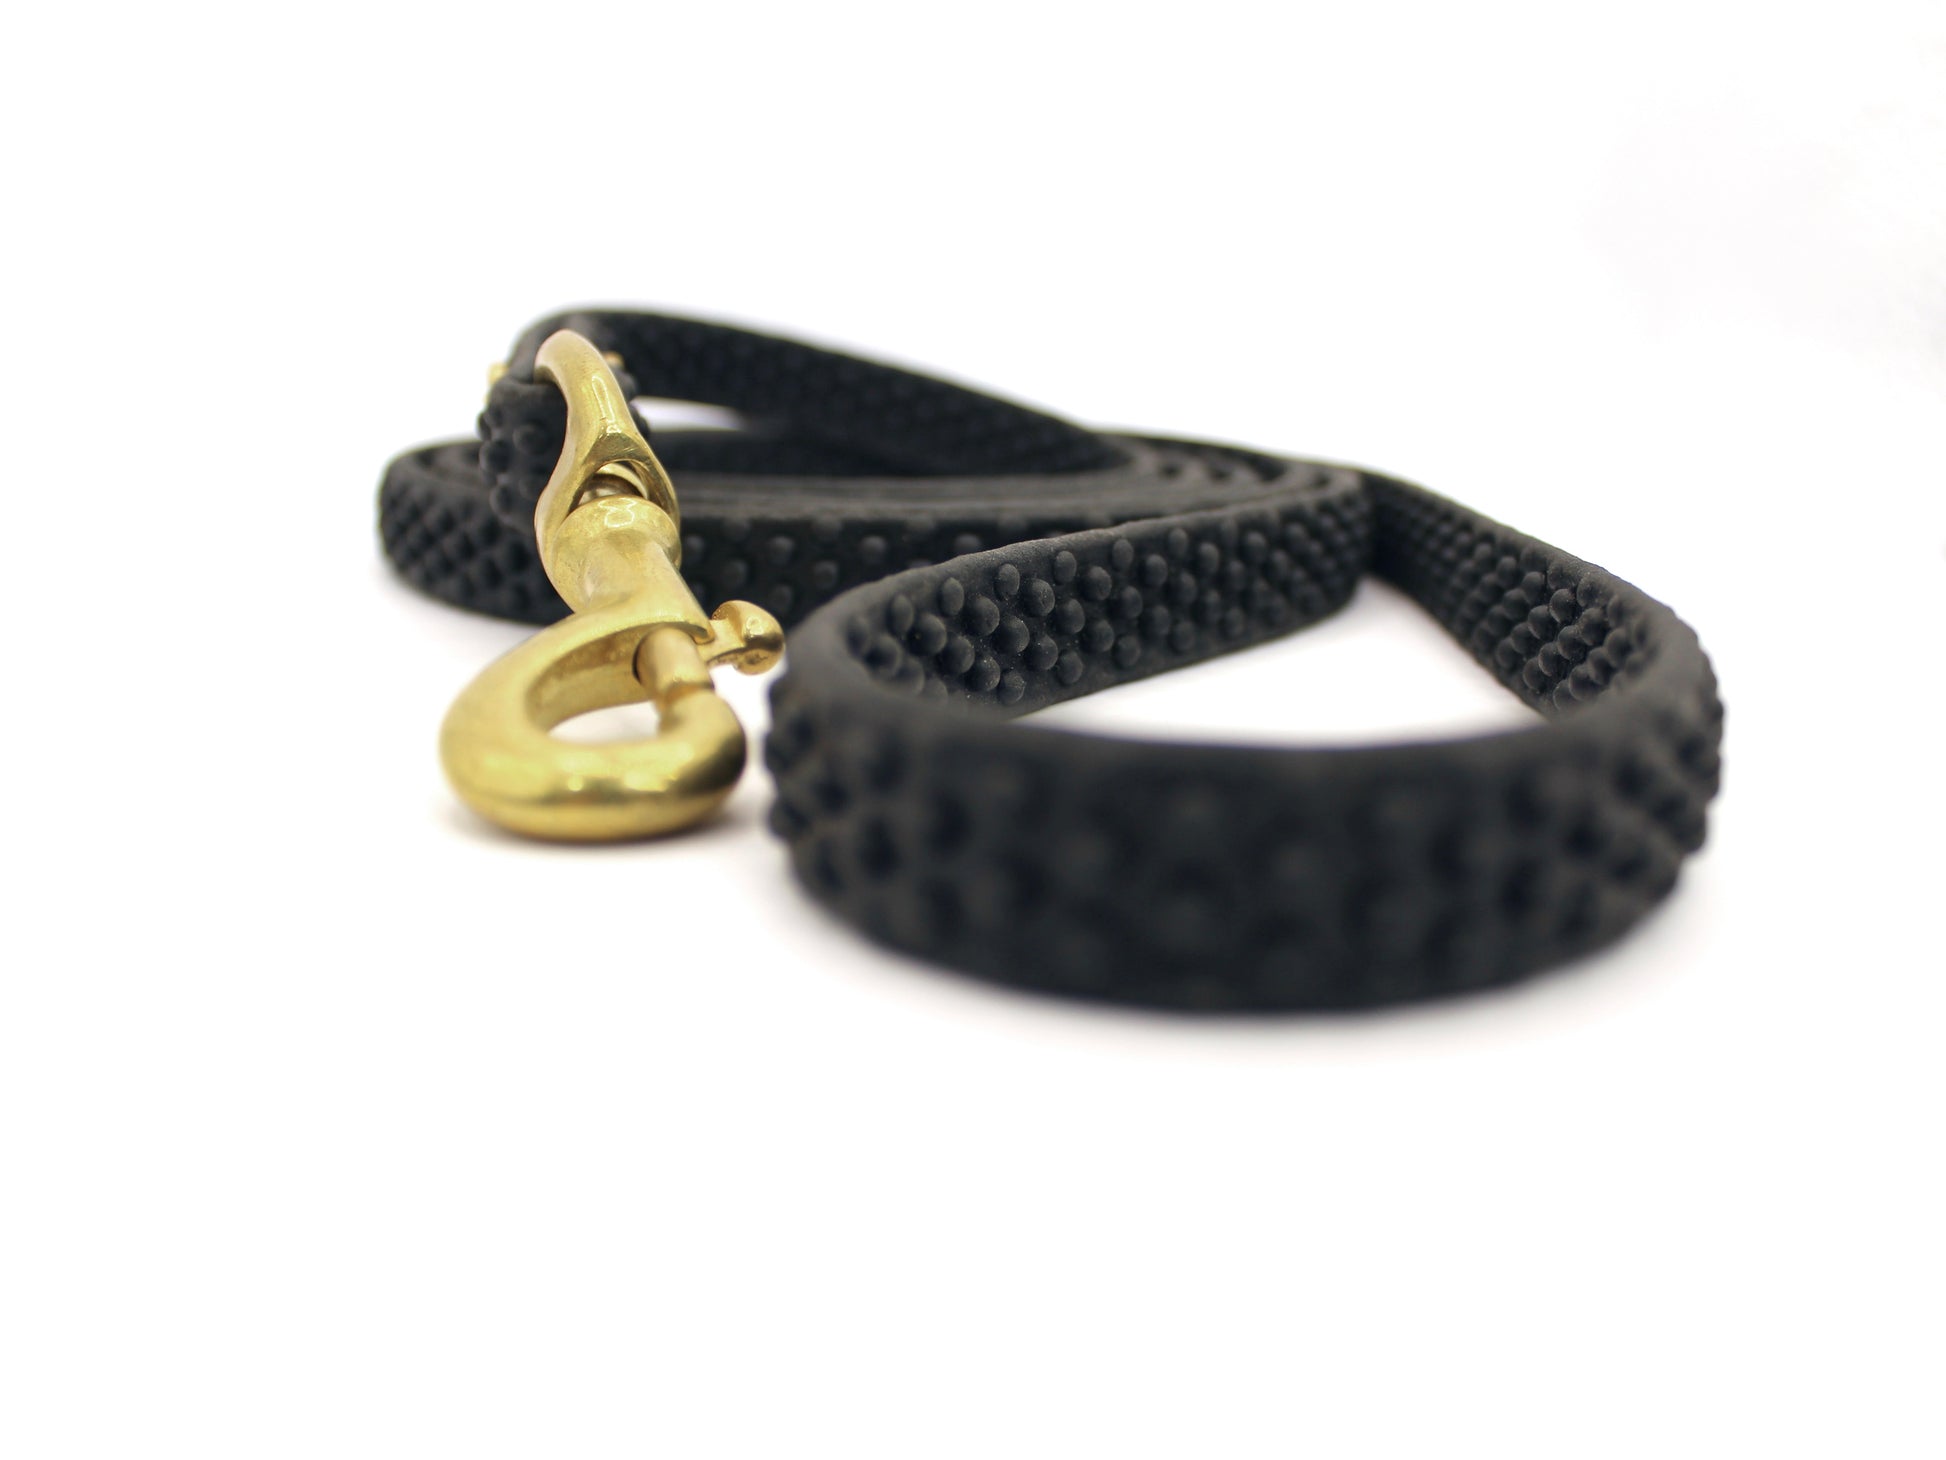 Super Grip Dog Leash, Super Grip BioThane, Super Grippy Leash for obedience, training, comfortable to hold in hand. schutzhund, IGP, PSA, sport dog, sport training, focused heeling, heeling, bump textured, competition, Heavy Duty BioThane (USA) Classic Leash with Handle, available in Custom Lengths, Solid Brass Hardware. Weather proof, water proof, long lasting, durable, heavy duty, leather alternative, fade proof. Dog leash, dog lead, gift, for him, for her, birthday, great grip, BQ Leashes